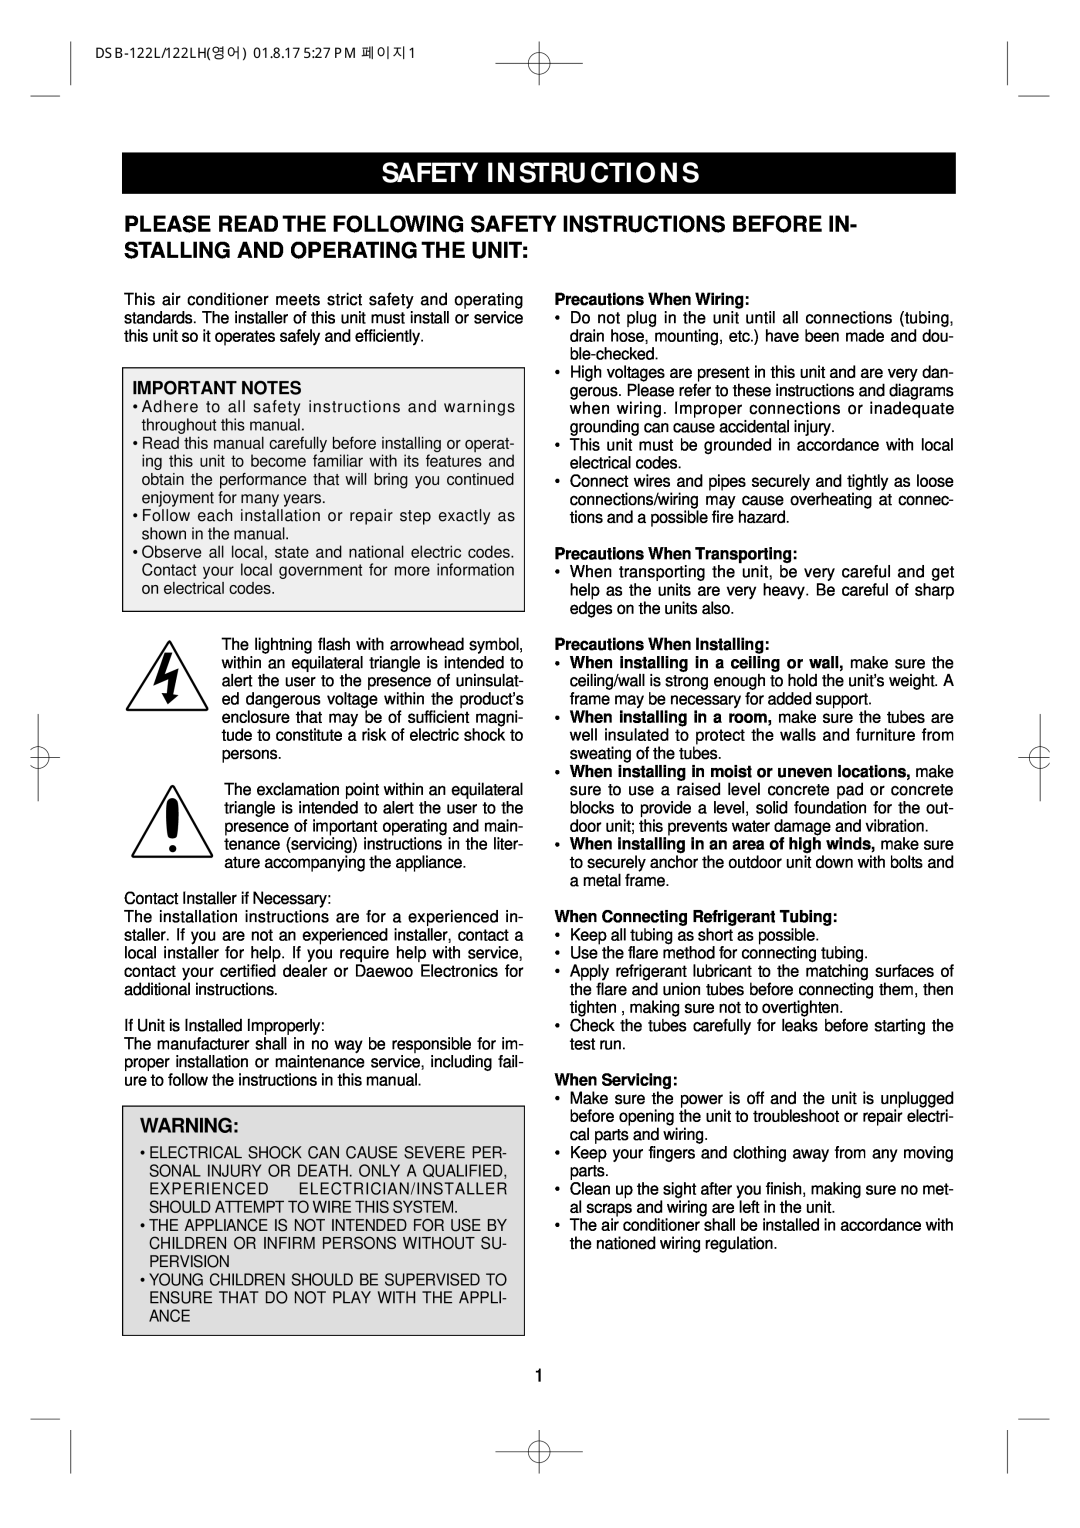 Daewoo DSB-122LH owner manual Safety Instructions, Important Notes, Precautions When Wiring, Precautions When Transporting 